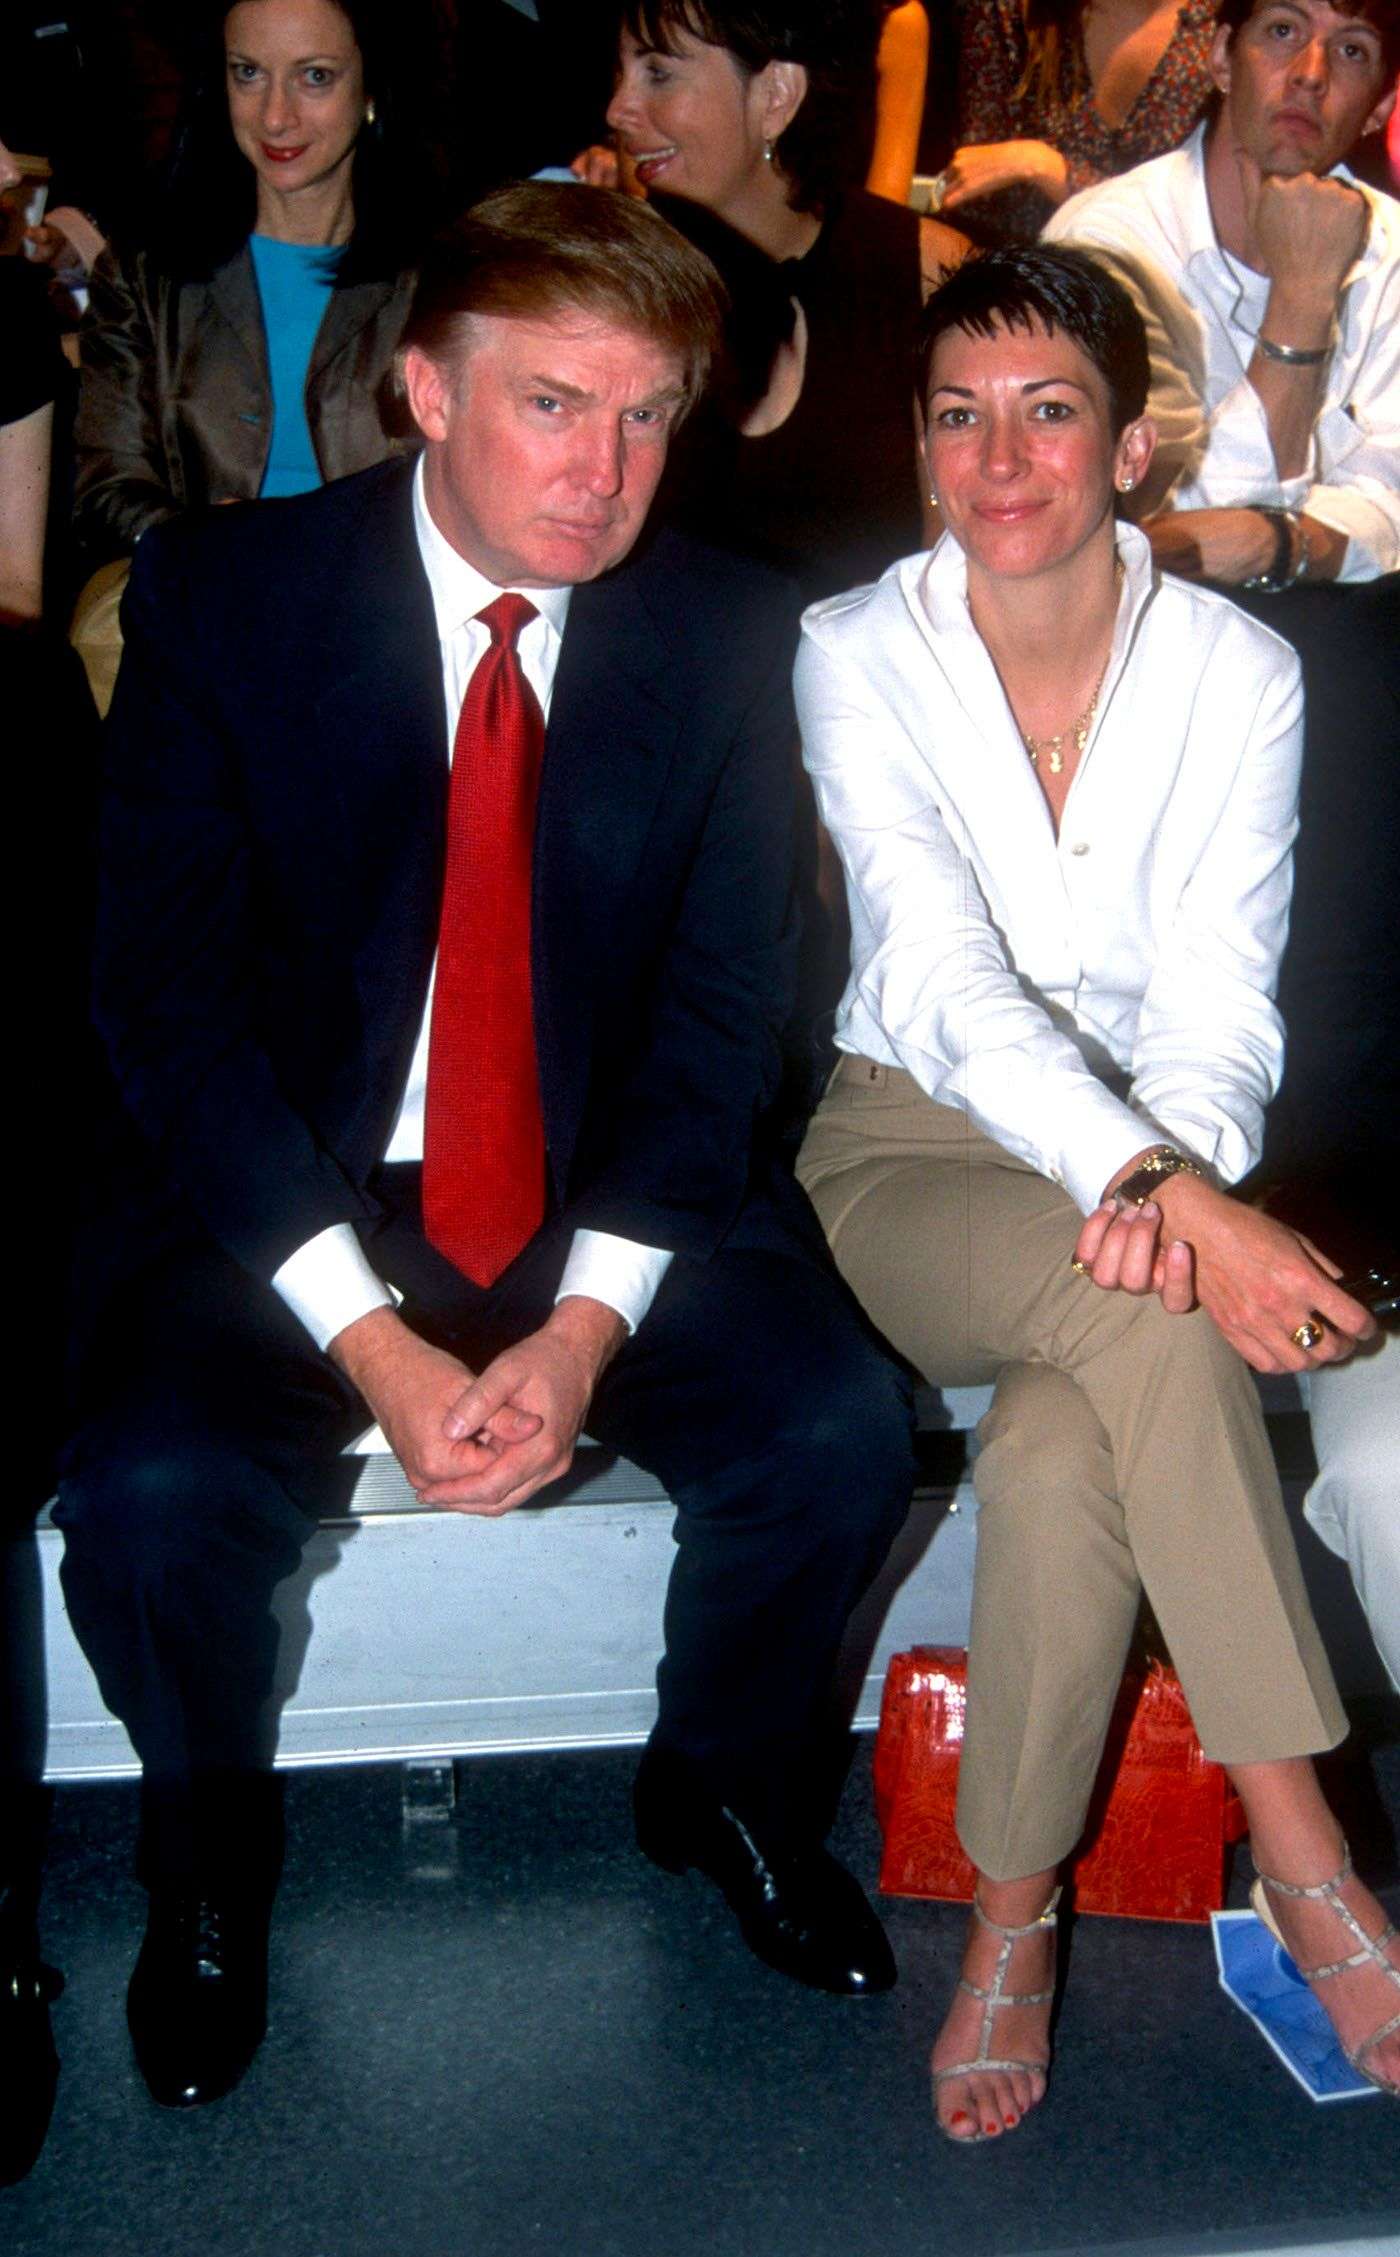 image showing Donald Trump pictured with Ghislaine Maxwell